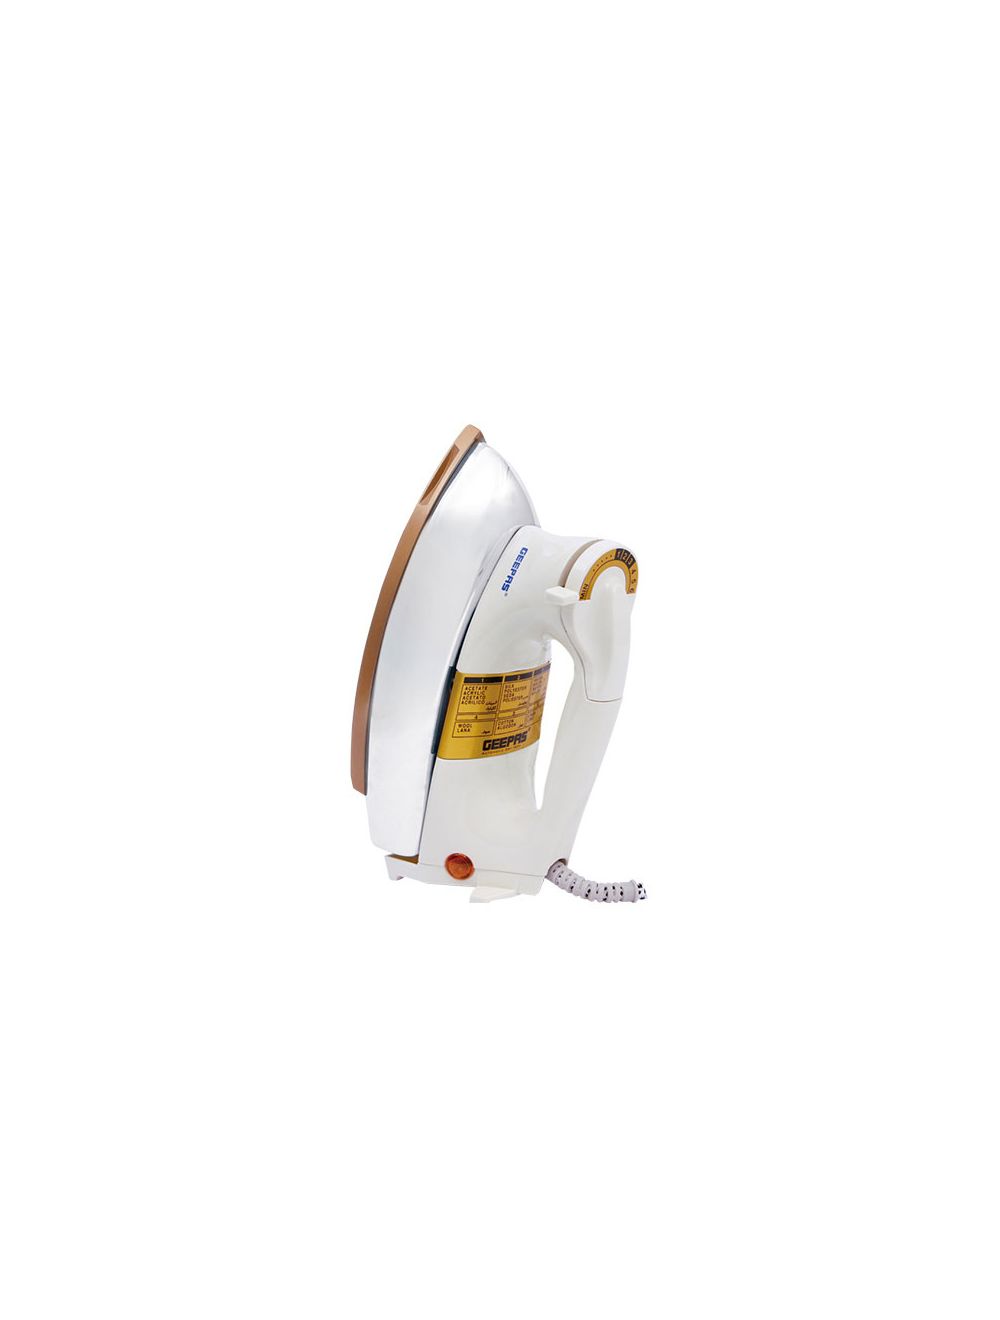 Geepas Dry Iron 1200W White | reliable performance | lightweight | variable steam settings | safety features | stylish | even heat distribution | Halabh.com